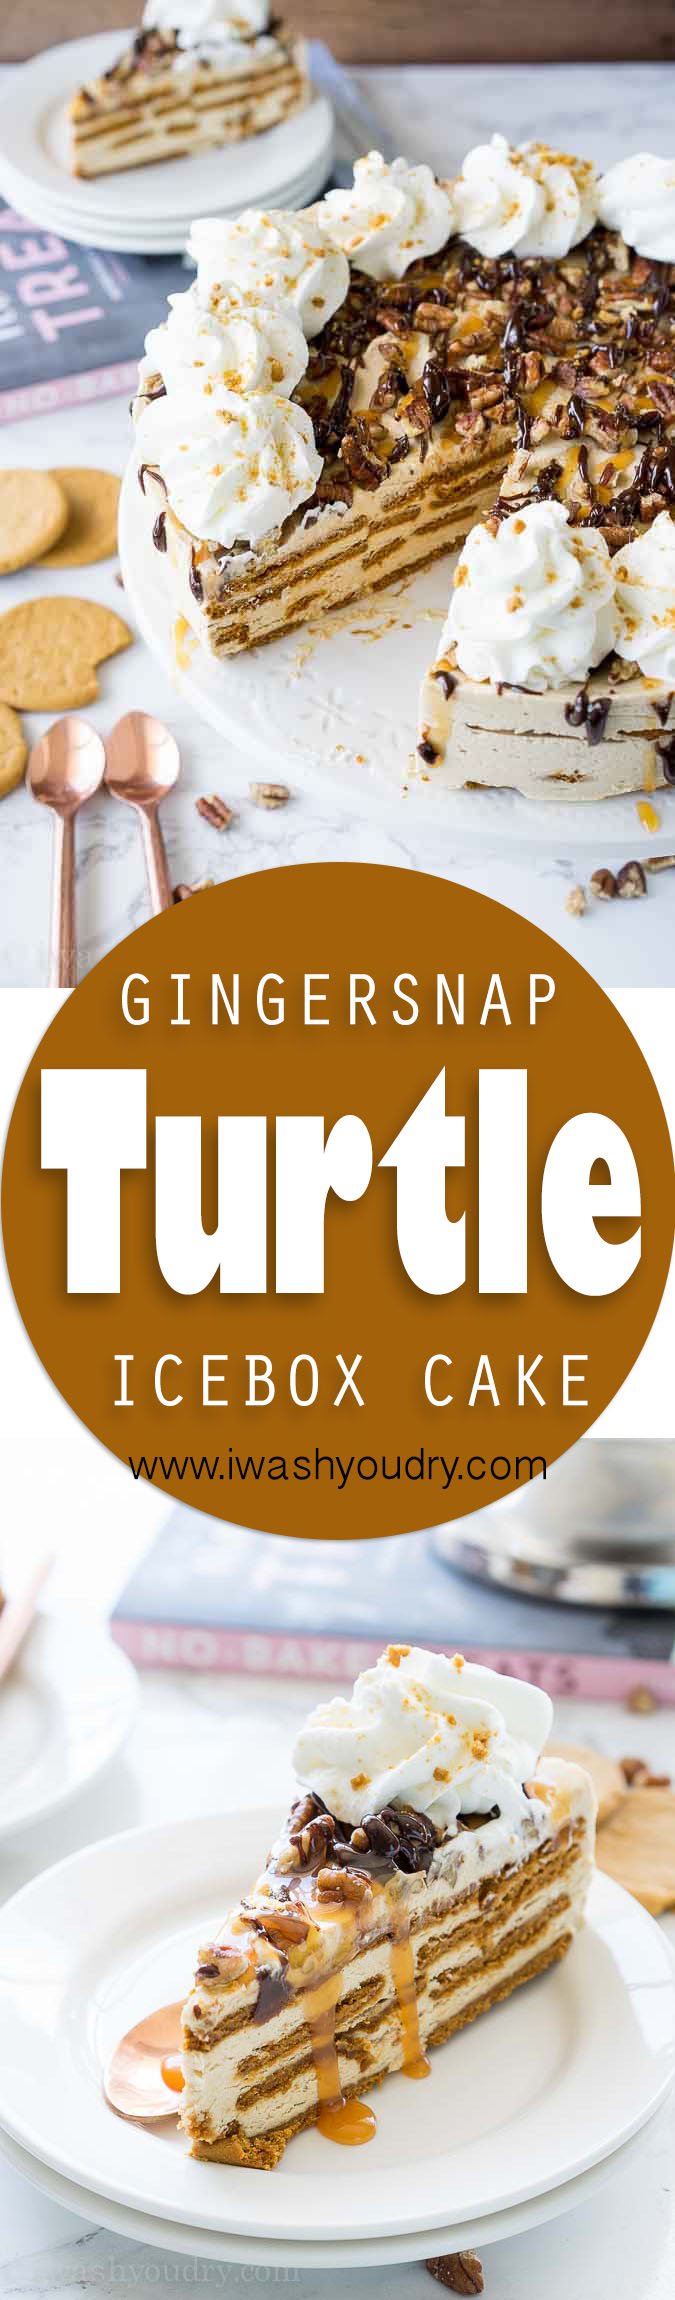 This no bake Gingersnap Turtle Icebox Cake is loaded with a sweet and creamy molasses filling, crisp gingersnap cookies and a hot fudge and caramel topping that's to die for!